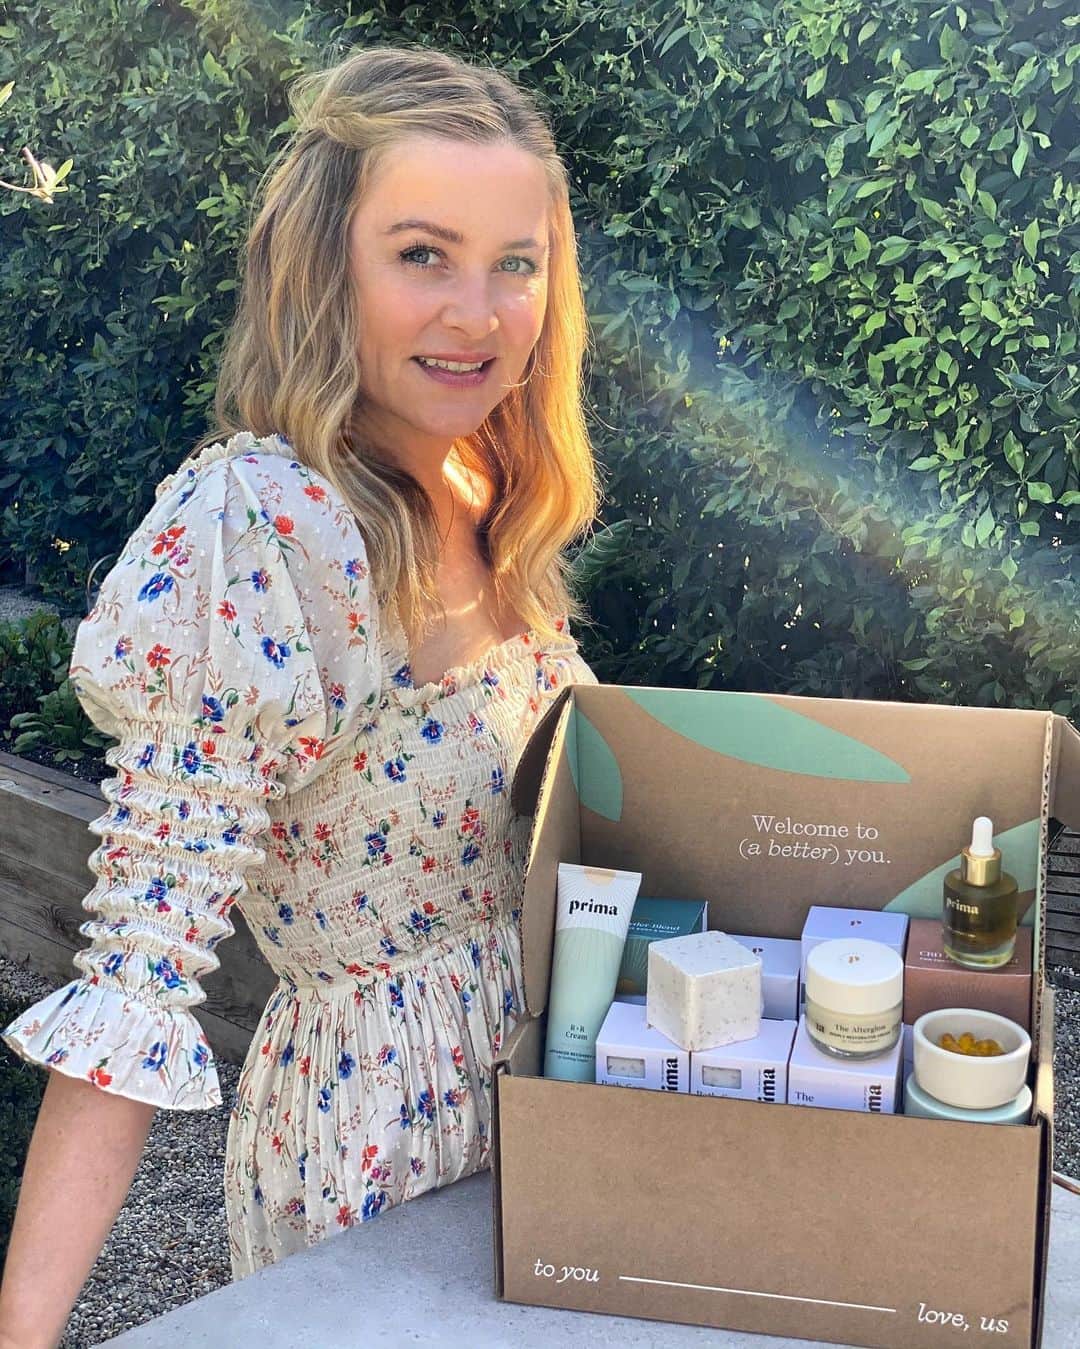 ジェシカ・キャプショーさんのインスタグラム写真 - (ジェシカ・キャプショーInstagram)「GRATITUDE GIVEAWAY ❤️🧡💛💚💙💜 Giving you all a chance to WIN the entire @PRIMA suite of products ($550 value plus some extra sweet goodies) . The beginning, middle and end of the holiday season can be challenging for ALL. Add to that it’s an especially chaotic year, so I’m thinking we could all use some daily stress relief. It’s no secret how smitten I am by @PRIMA goods as my go-to favorite everyday wellness solution - helping me show up grounded, self aware and less stressed. Prima's botanical therapeutics have made a profound difference in my skin, mood, body, and sleep. True story. . To show my gratitude for you all - I will GIFT one lucky winner the entire line of @PRIMA products 🌱 ($550 value), with a handwritten note from me to you, and a few extra goodies :)  . ✨TO ENTER: ✨ - Follow @prima - Tag 2 friends in the comments who could also use a boost of relaxation 💛 GIVEAWAY ENDS TUESDAY 11/24.  ✨Instagram LIVE ✨: I will be going Live this Tuesday / Nov. 24 at 2:30pm PST with @prima Founder/CEO (my husband @christopher_gav !) for an intimate (first ever!) conversation with us to talk about family, wellness, parenting, daily practices, and answer your questions, and also to announce the WINNER. See you then!! It’s going to be SO fun!!  . *NO PURCHASE OR CREDIT CARD INFORMATION NECESSARY TO WIN, ENTER OR CLAIM PRIZE. Giveaway ends on 11/24 at 3 pm PST. Must be 18 years or older to enter. Giveaway open to all 50 U.S. states. One winner will be chosen randomly on 11/24 and announced via Instagram Live. They will also be contacted via DM on 11/24. This giveaway is not affiliated with Instagram.」11月23日 9時17分 - jessicacapshaw